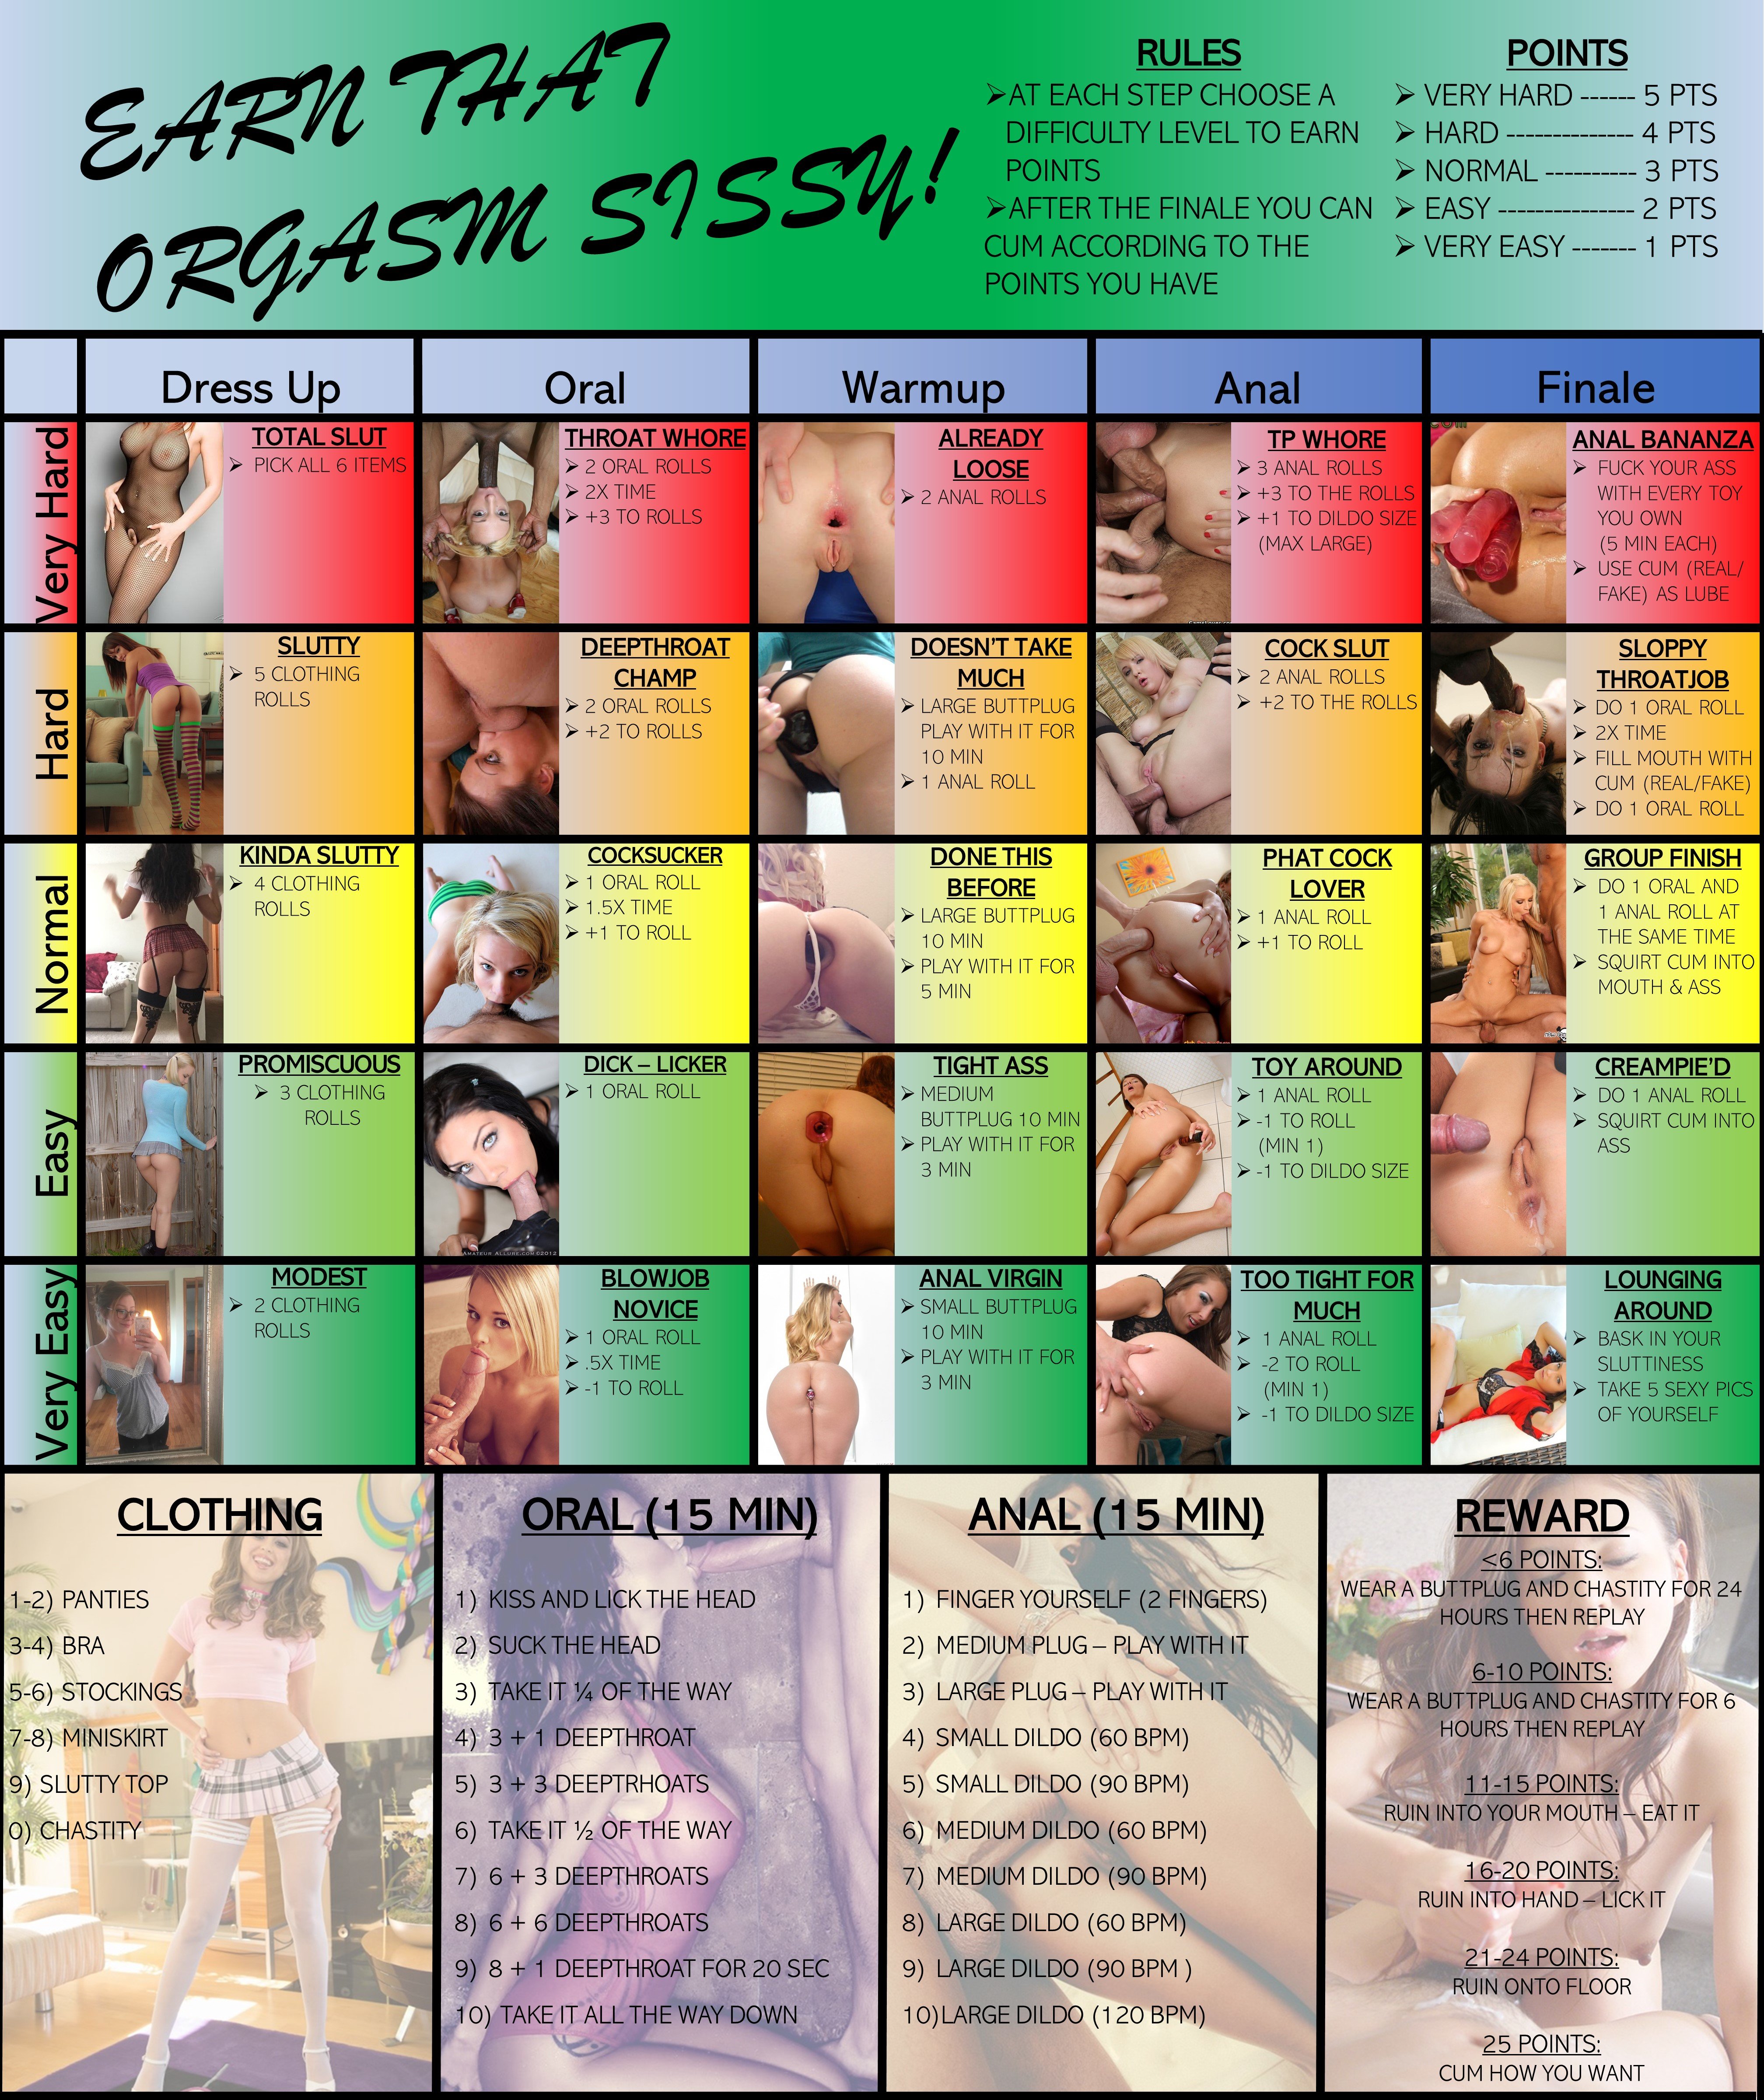 earn,that,orgasm,sissy,challenge,game,sissy,anal,blowjob,extreme,earn-it,ch...